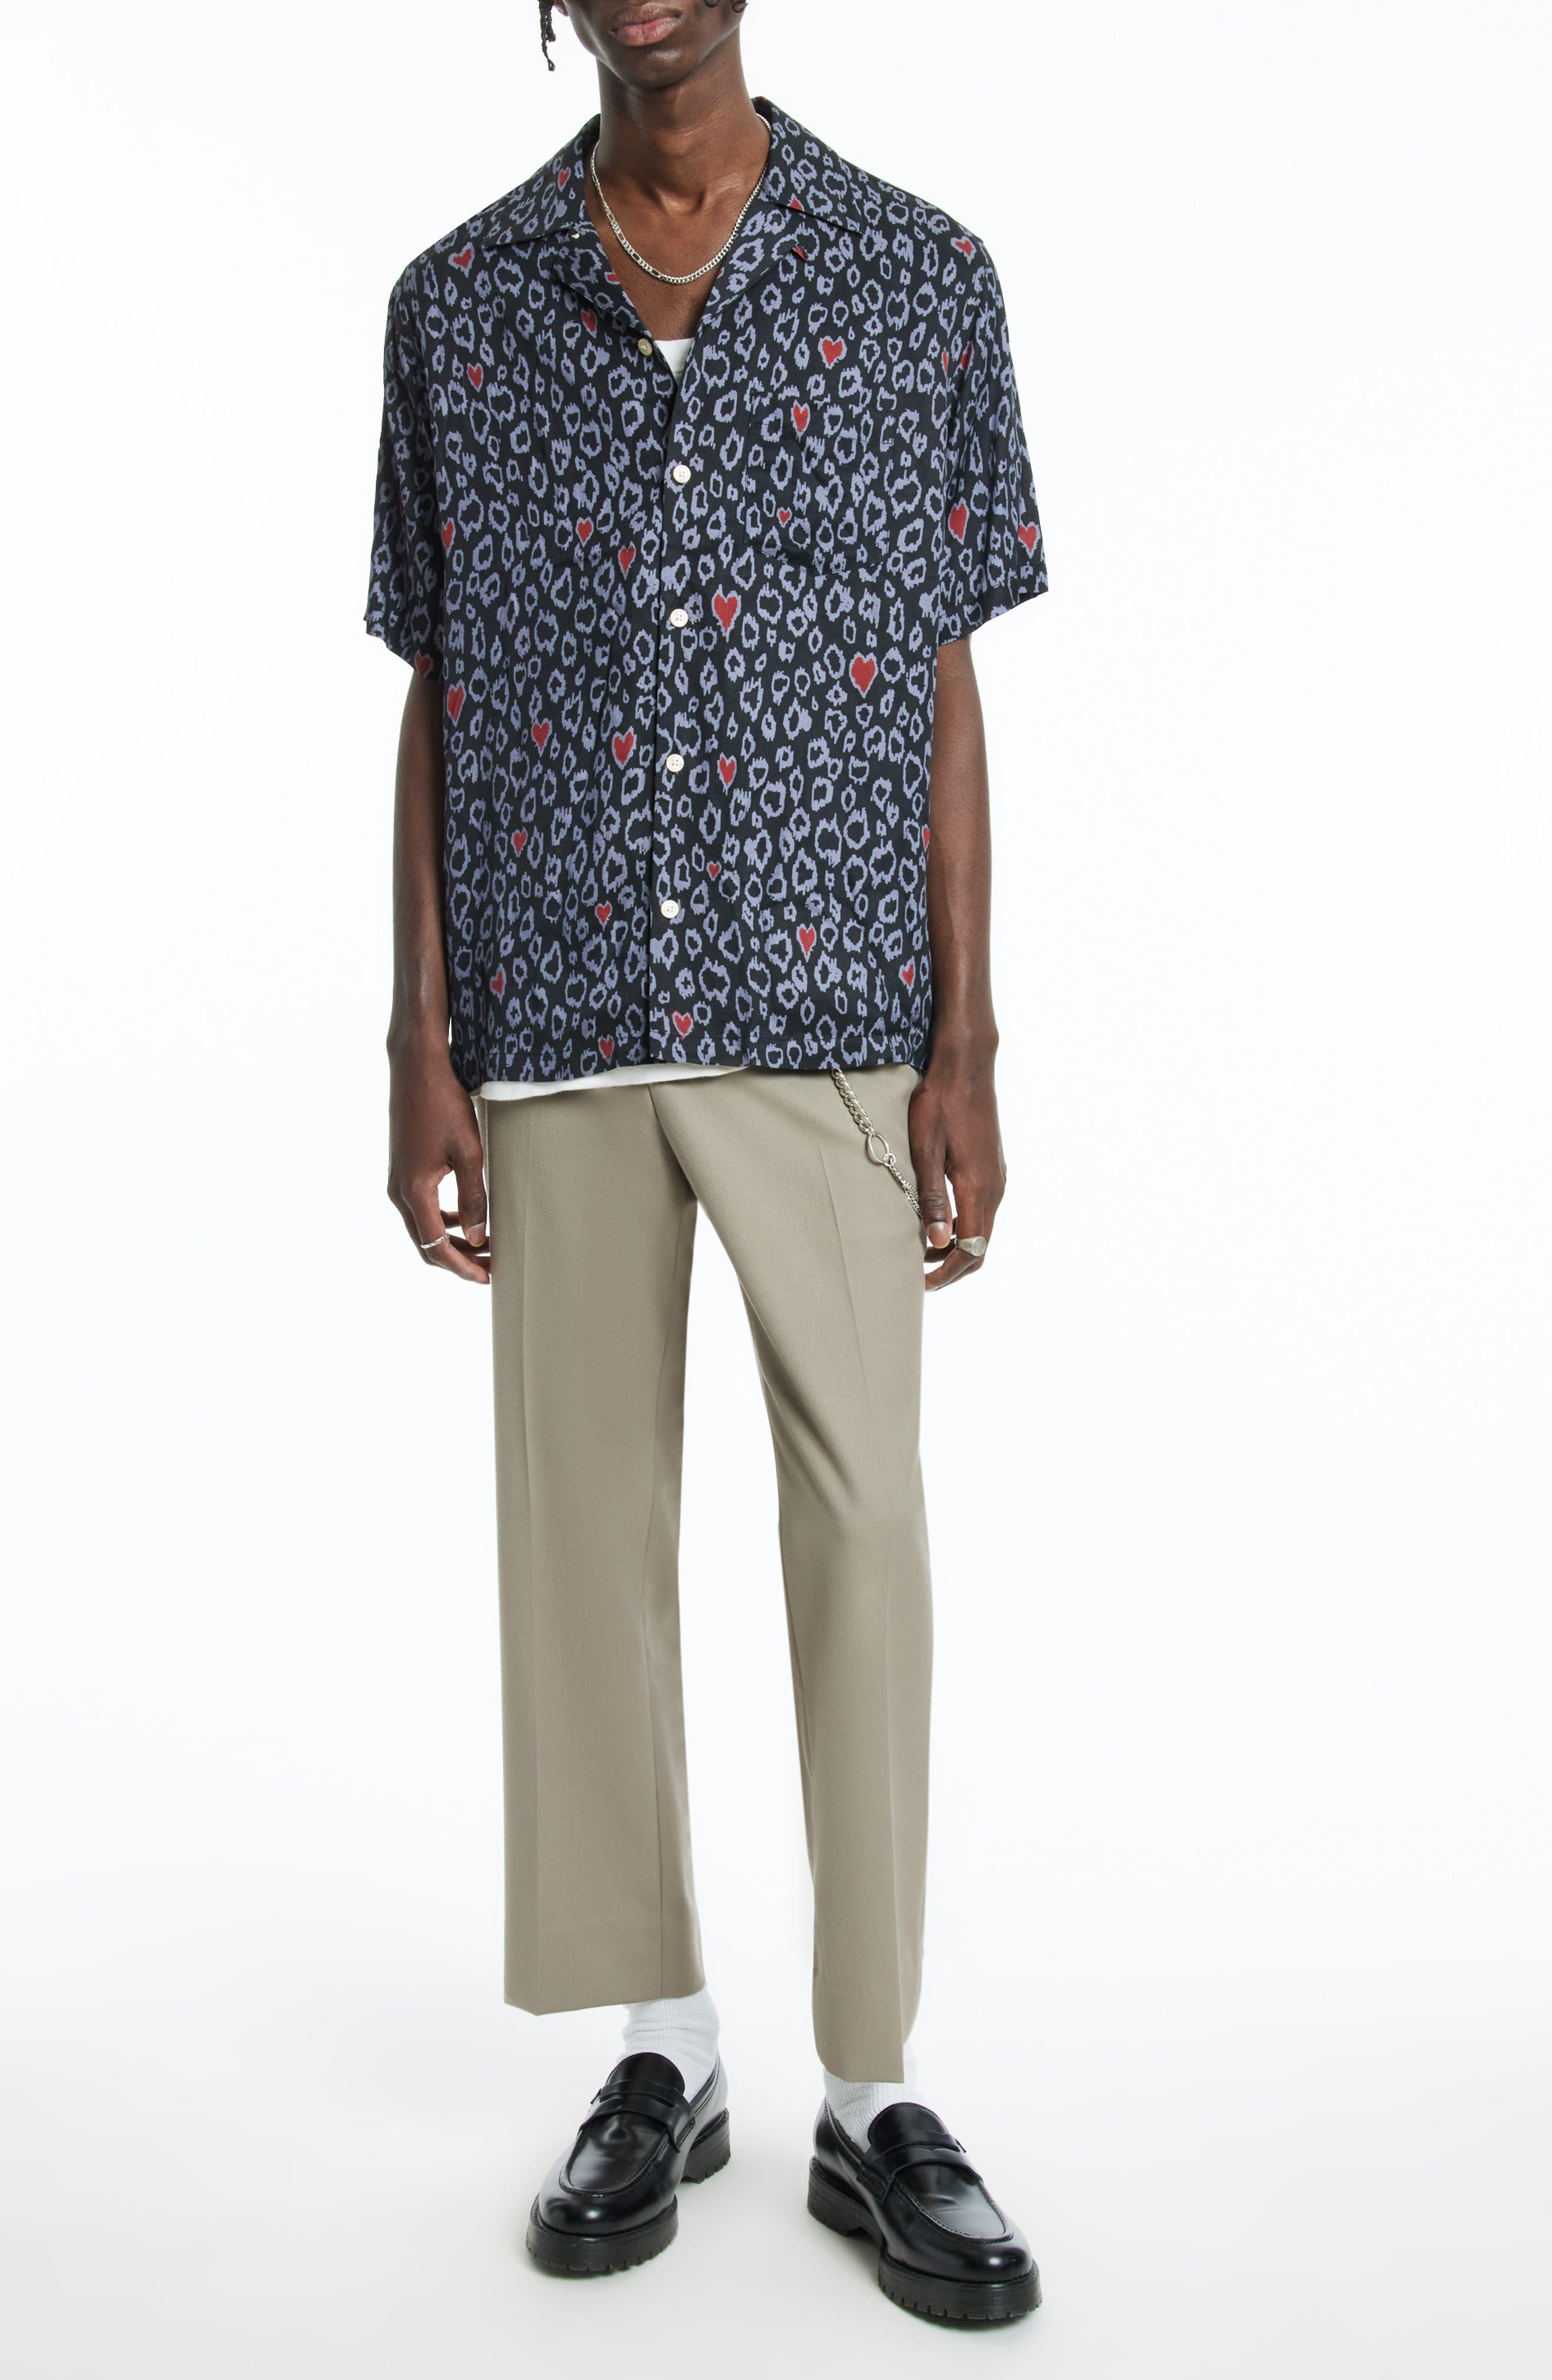 ALLSAINTS Starburn Printed Relaxed Fit Button Down Camp Shirt